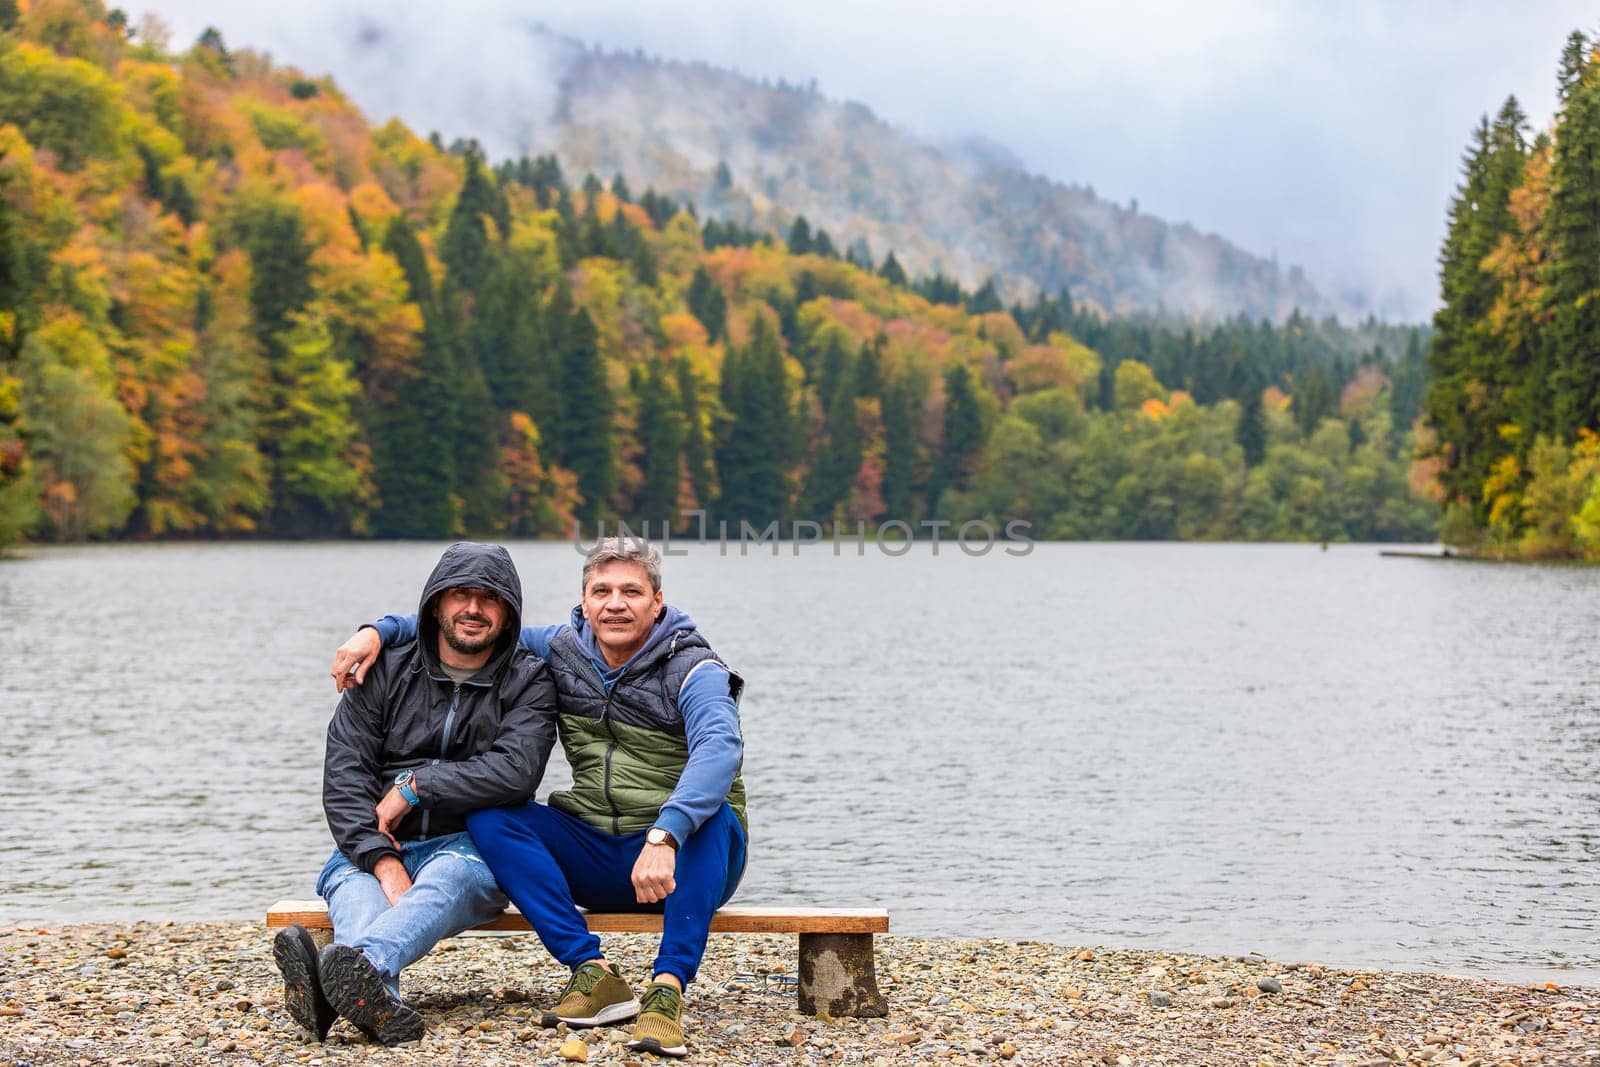 Two friends enjoy the view of a mountain lake surrounded by brightly colored trees. by Yurich32